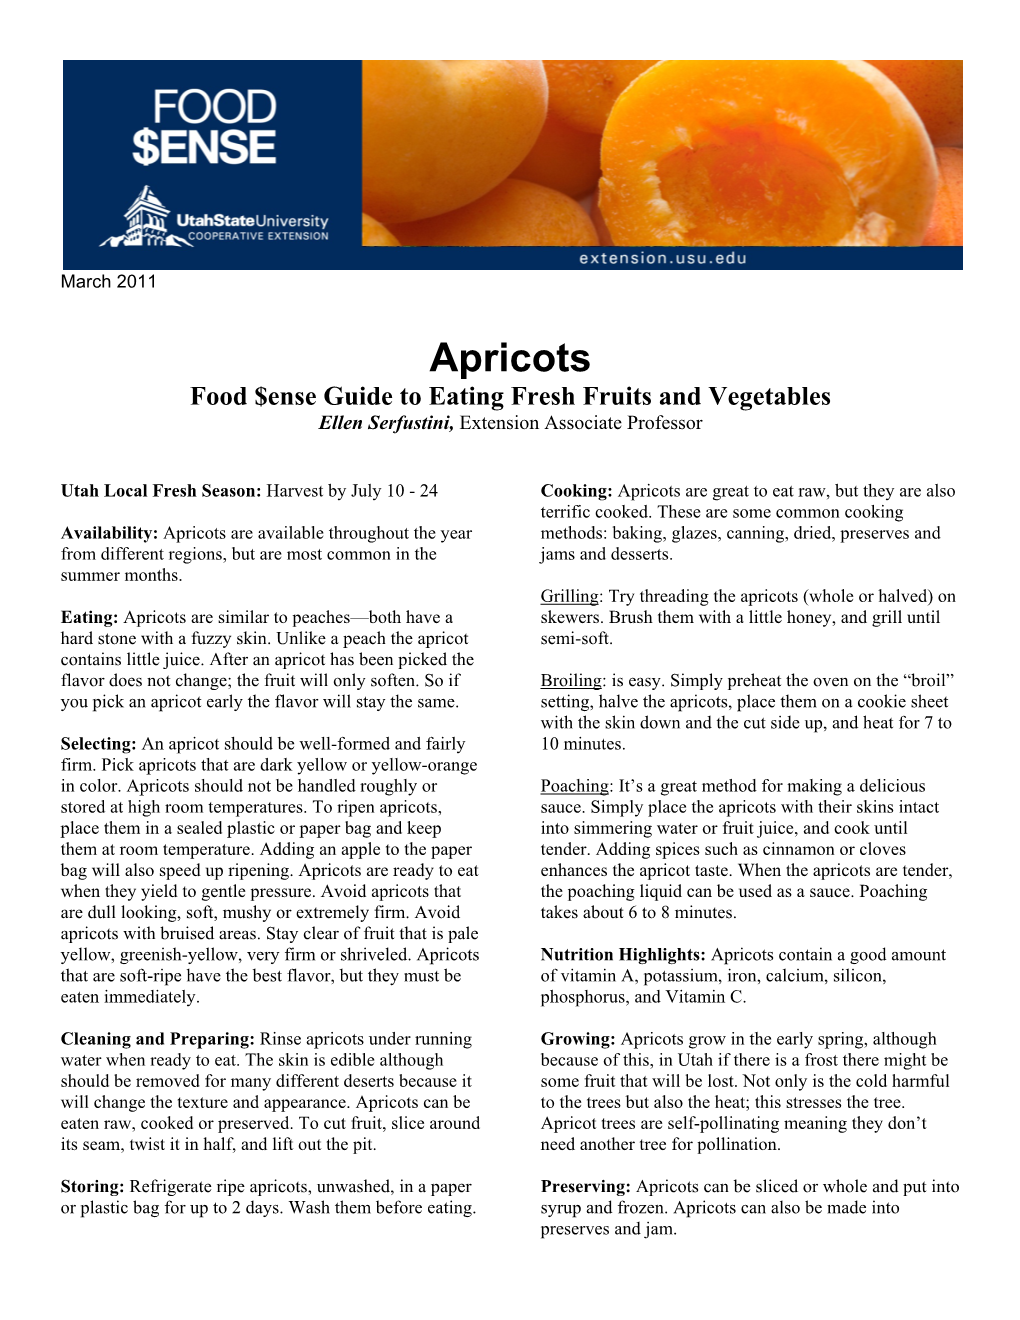 Apricots Food $Ense Guide to Eating Fresh Fruits and Vegetables Ellen Serfustini, Extension Associate Professor